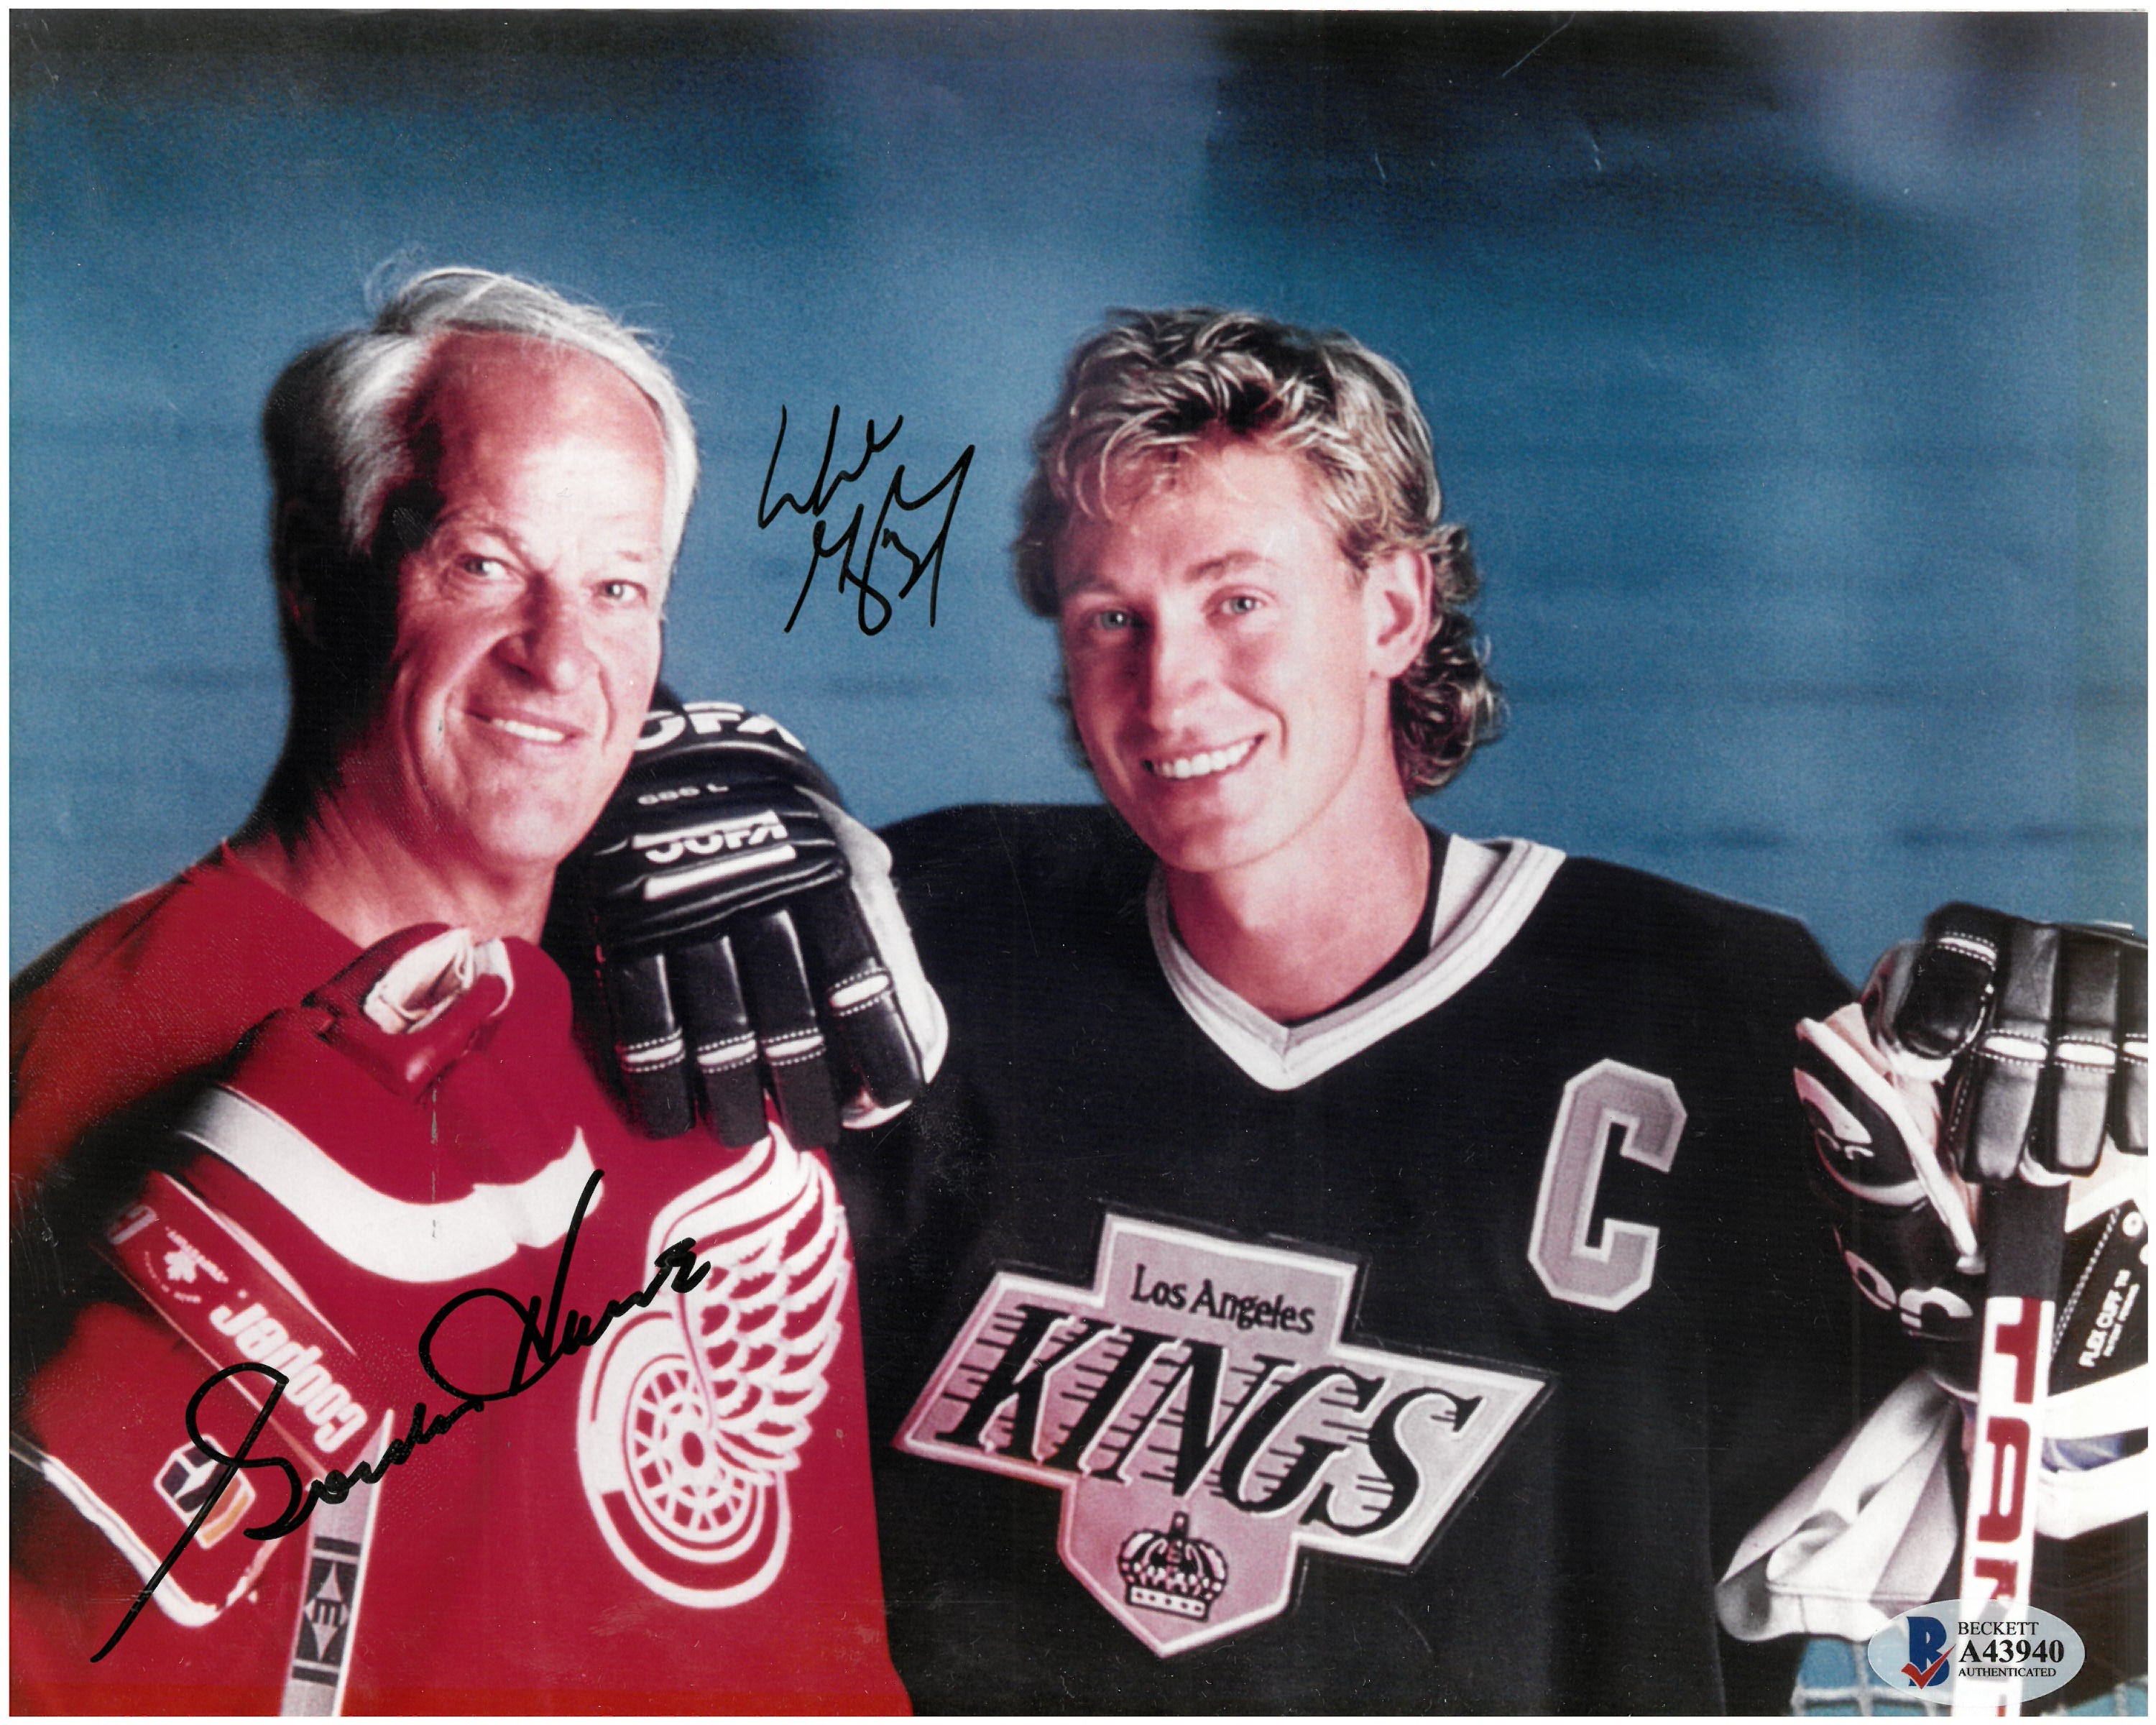 OTD in 1989, Wayne Gretzky broke Gordie Howe's @nhl points record scoring  point 1850 (assist to tie record) and 1851 (goal to pass record)…